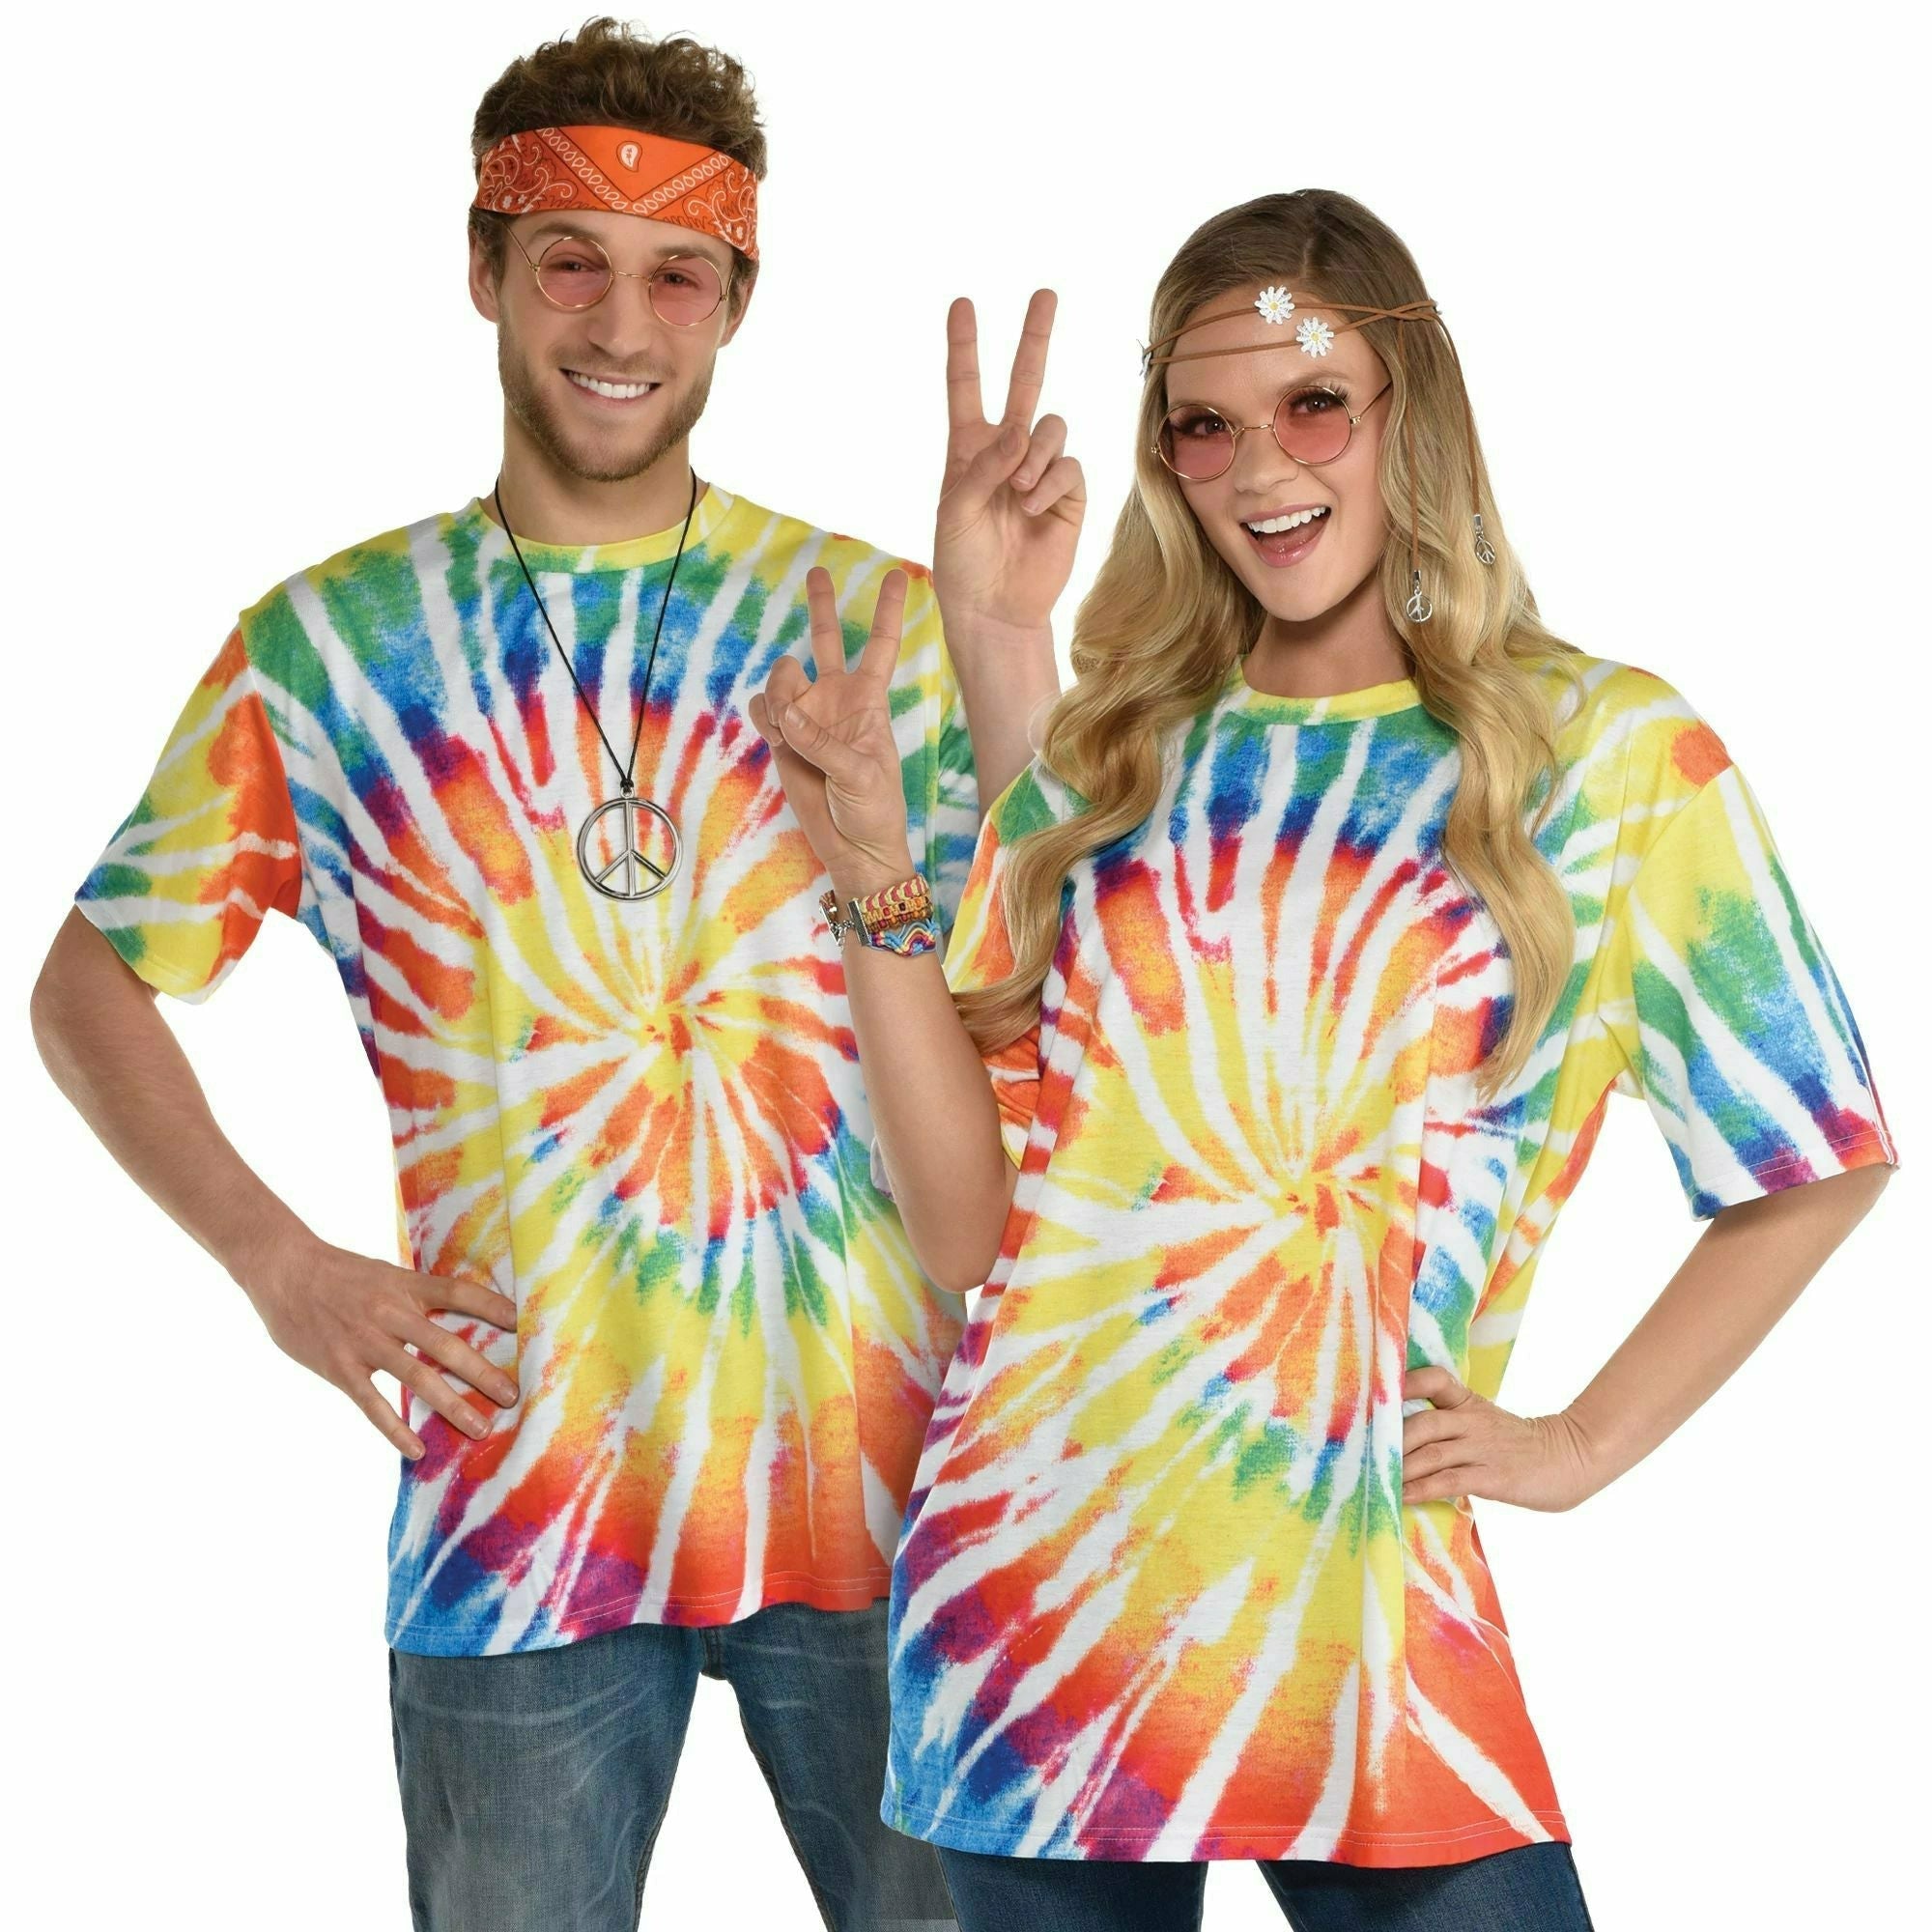 Amscan COSTUMES: ACCESSORIES S/M 60's Tie Dye Shirt